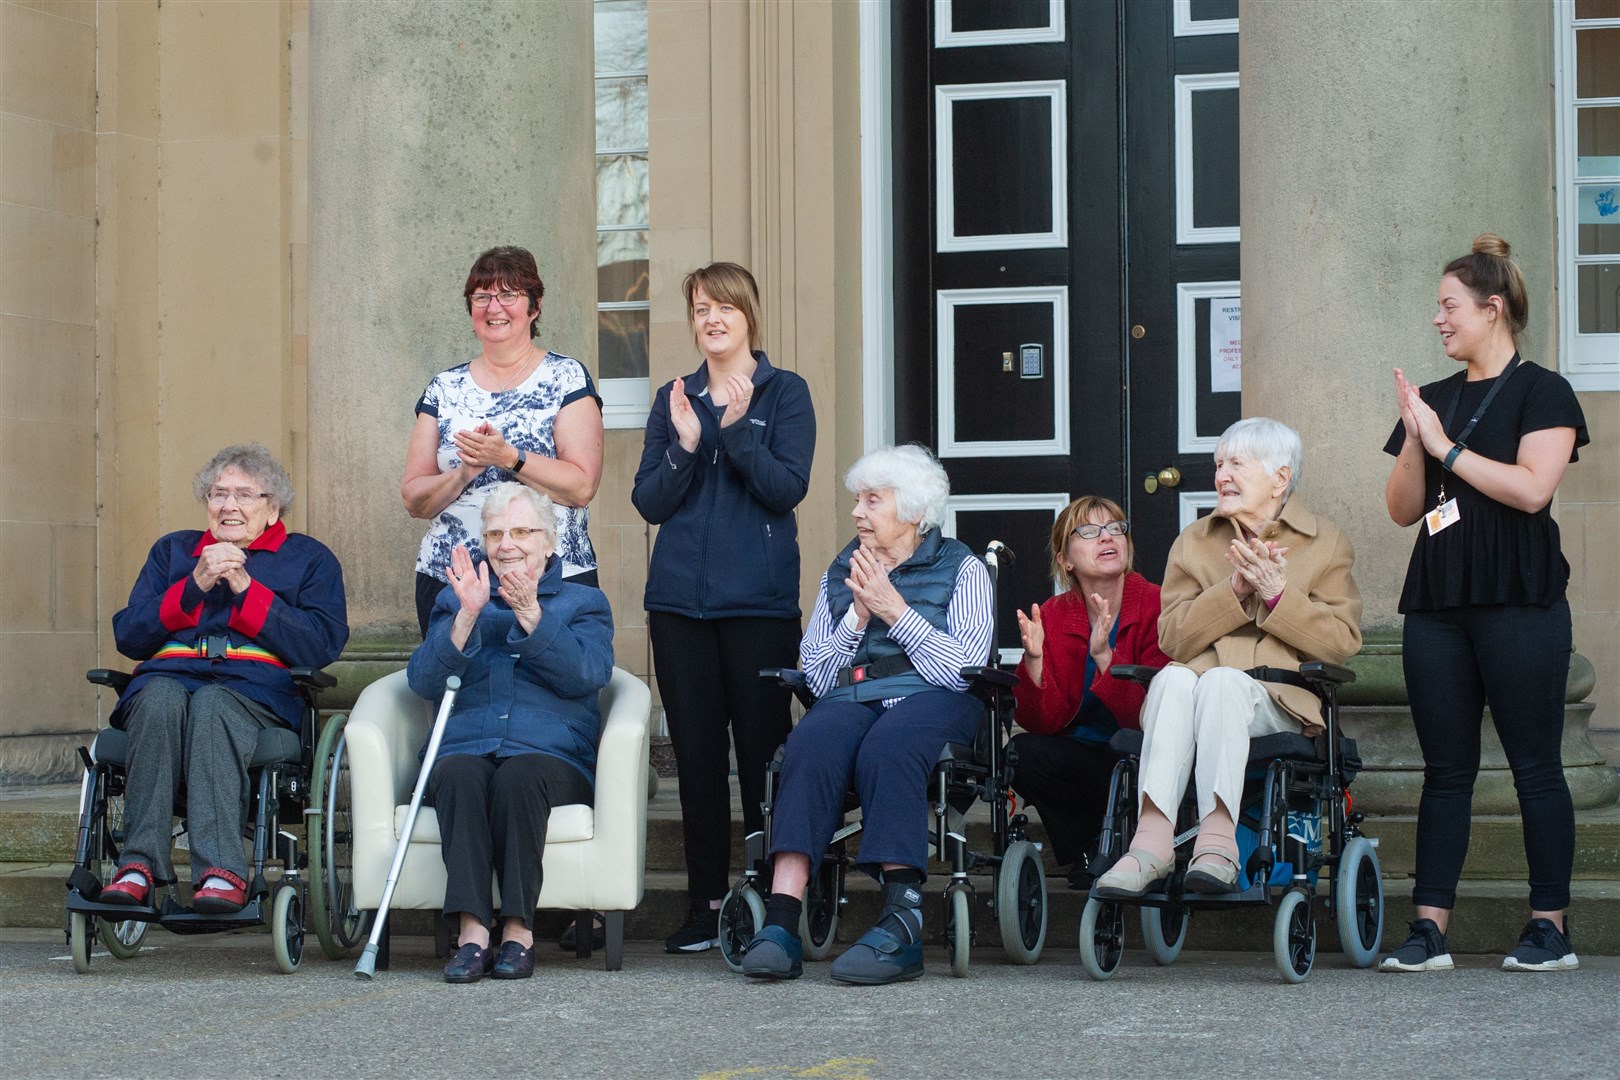 Residents and carers at Elgin care home Anderson's applaud during the UK-wide #clapforcarers at 8pm on Thursday nights. Pictures: Daniel Forsyth